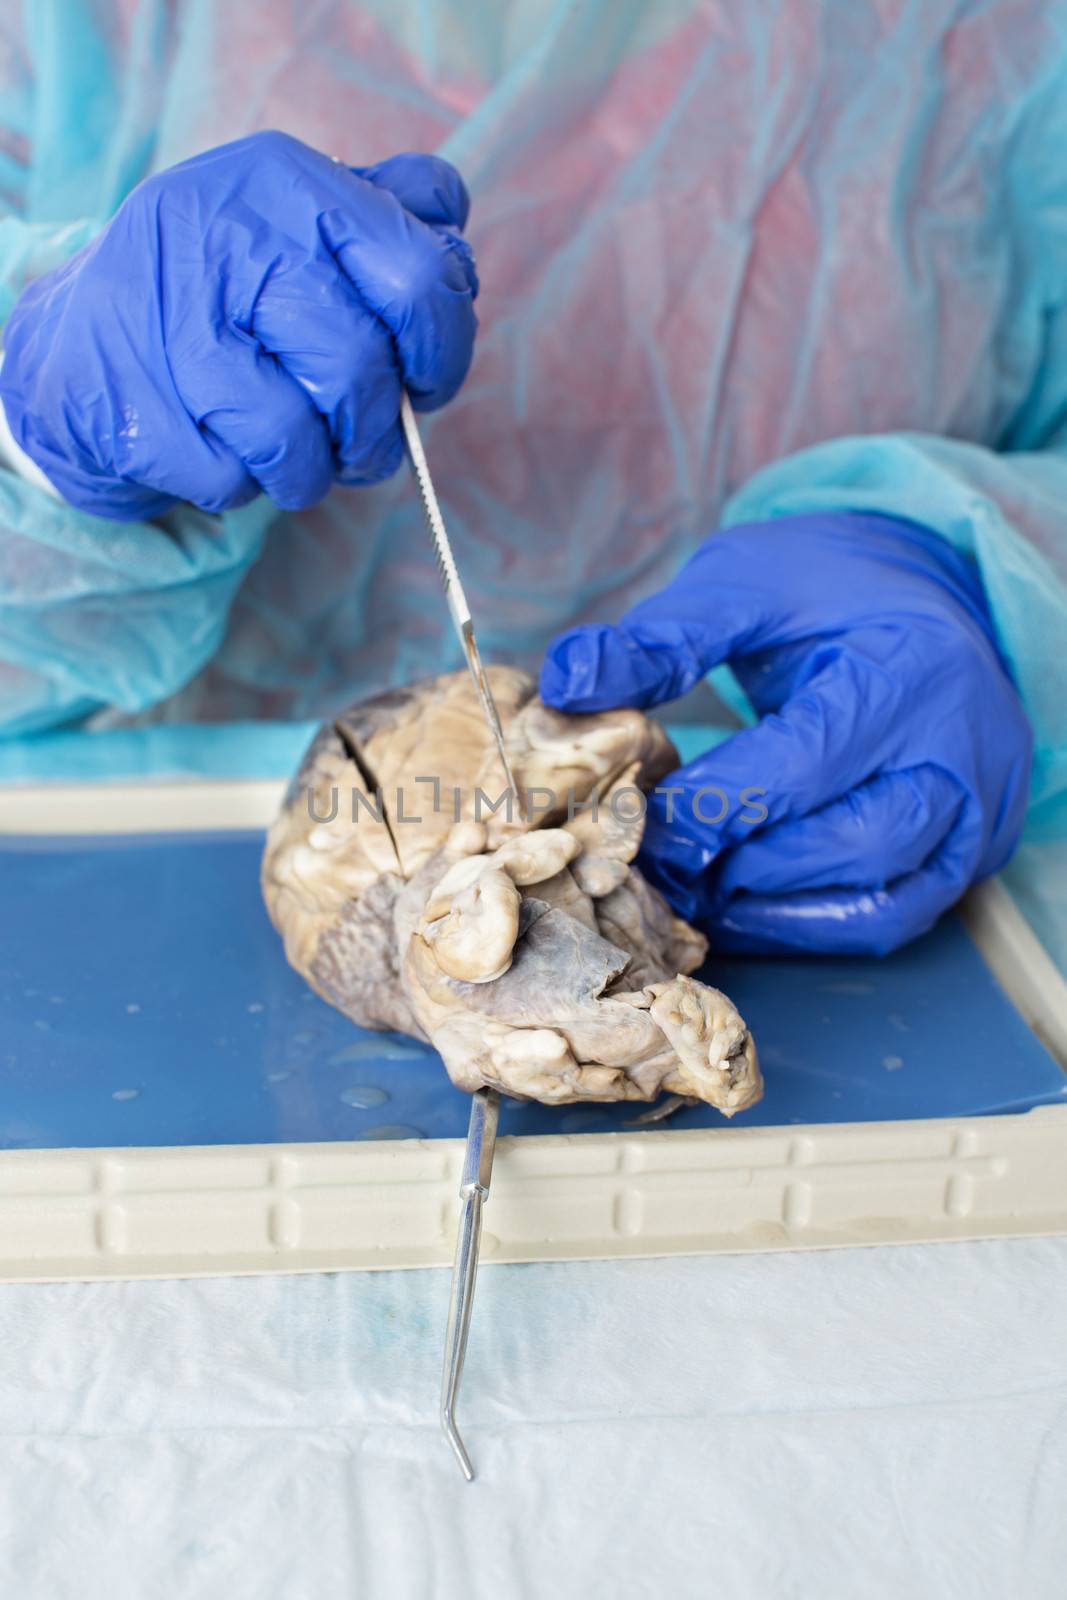 Medical student dissecting a sheep heart by coskun